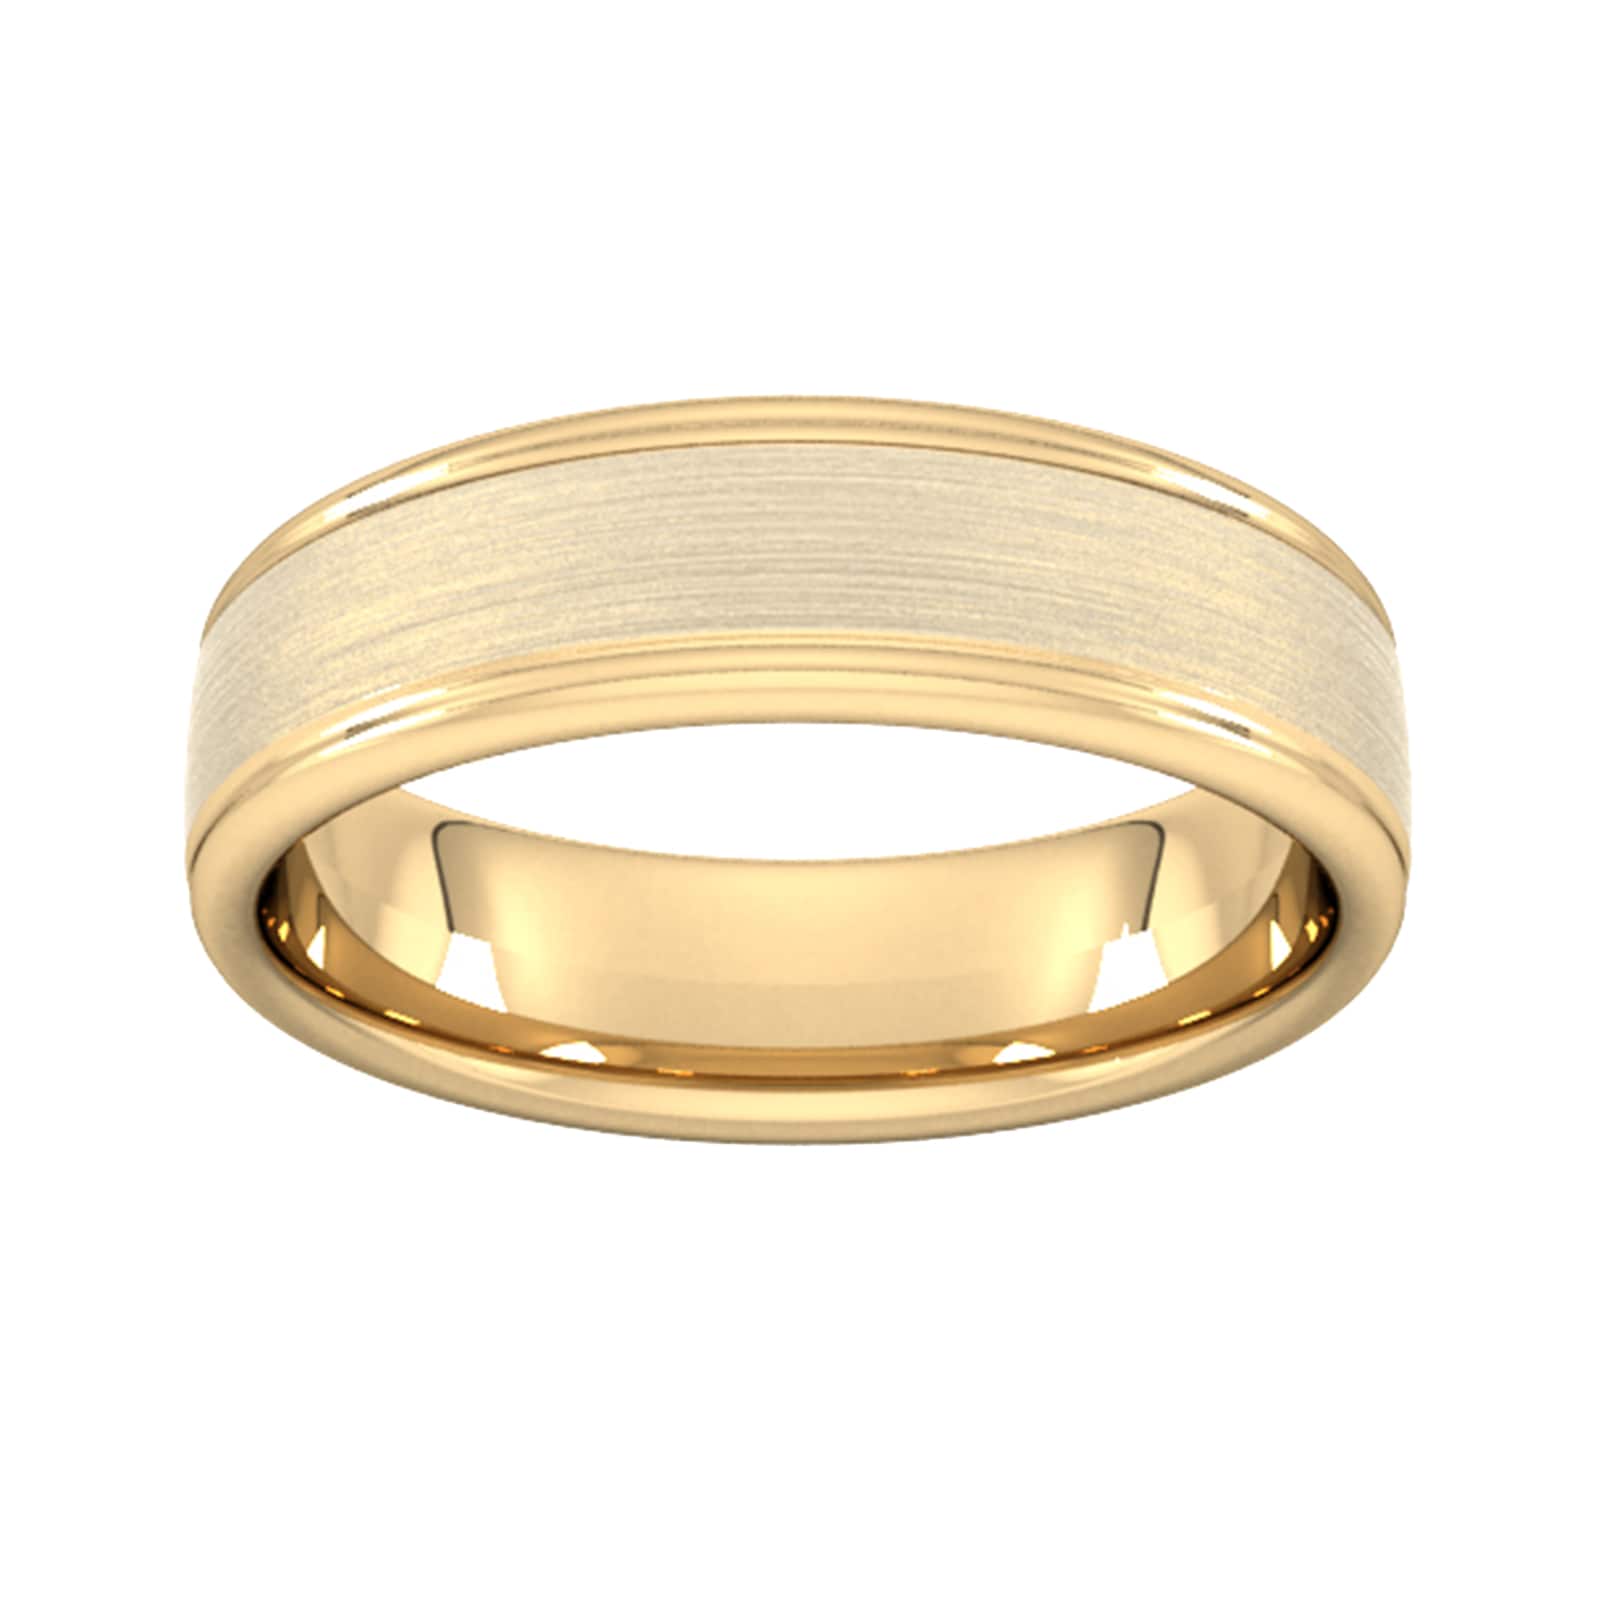 6mm Slight Court Standard Matt Centre With Grooves Wedding Ring In 9 Carat Yellow Gold - Ring Size G